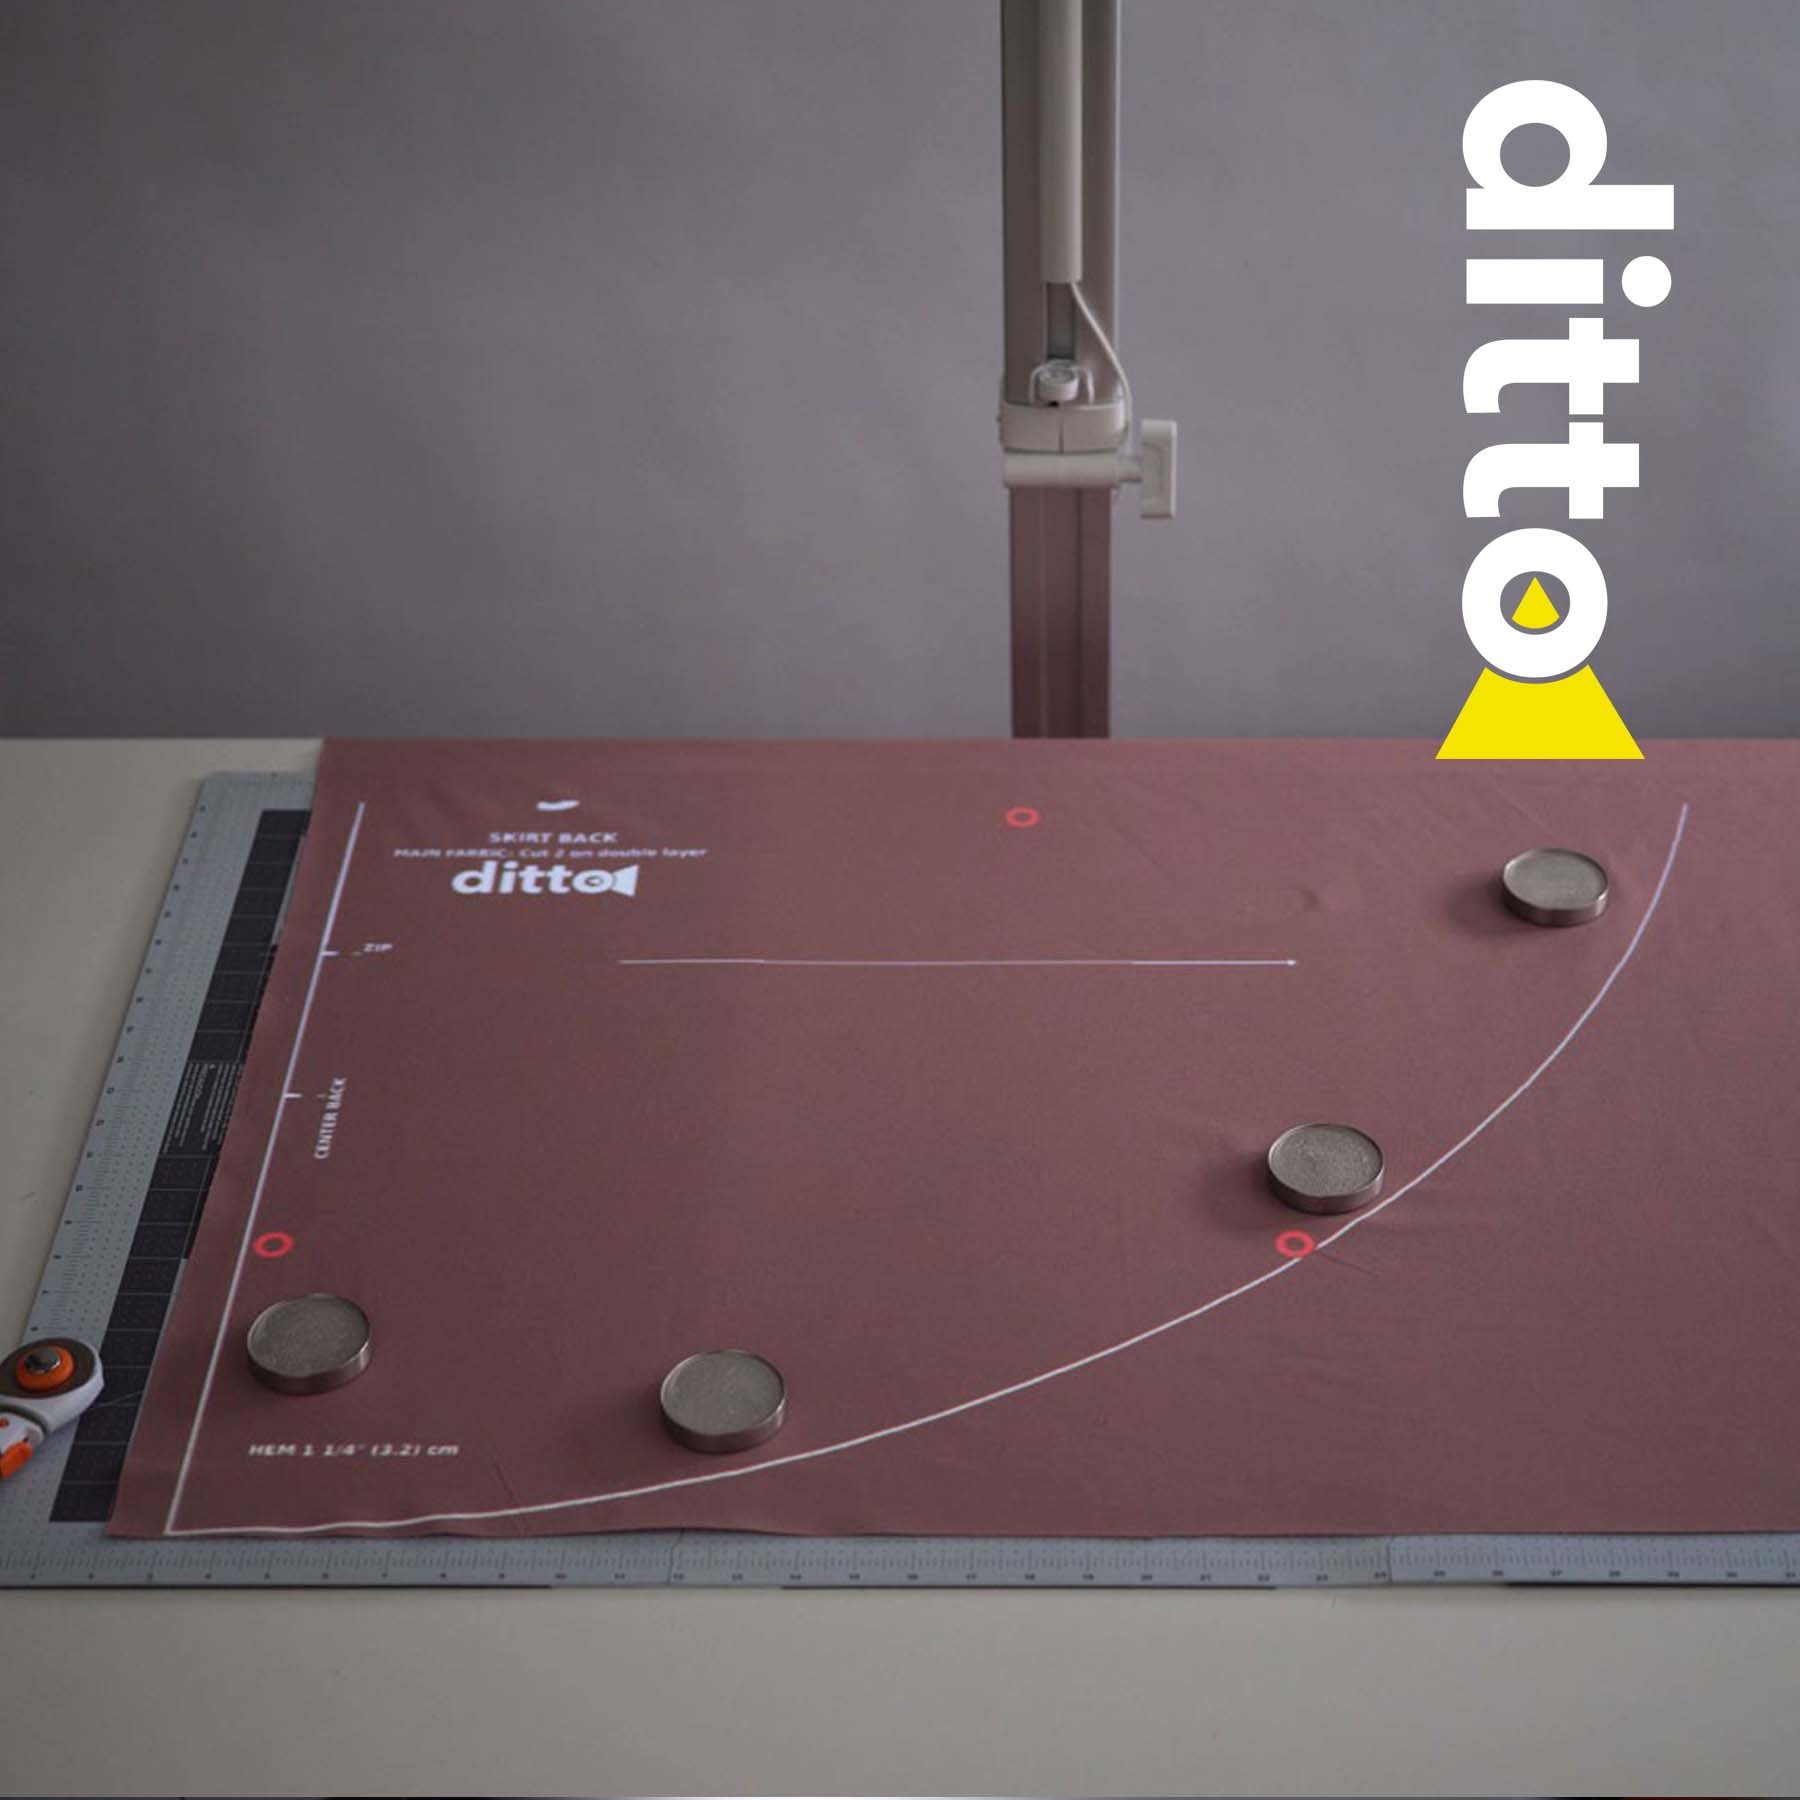 Ditto Digital Pattern Projector